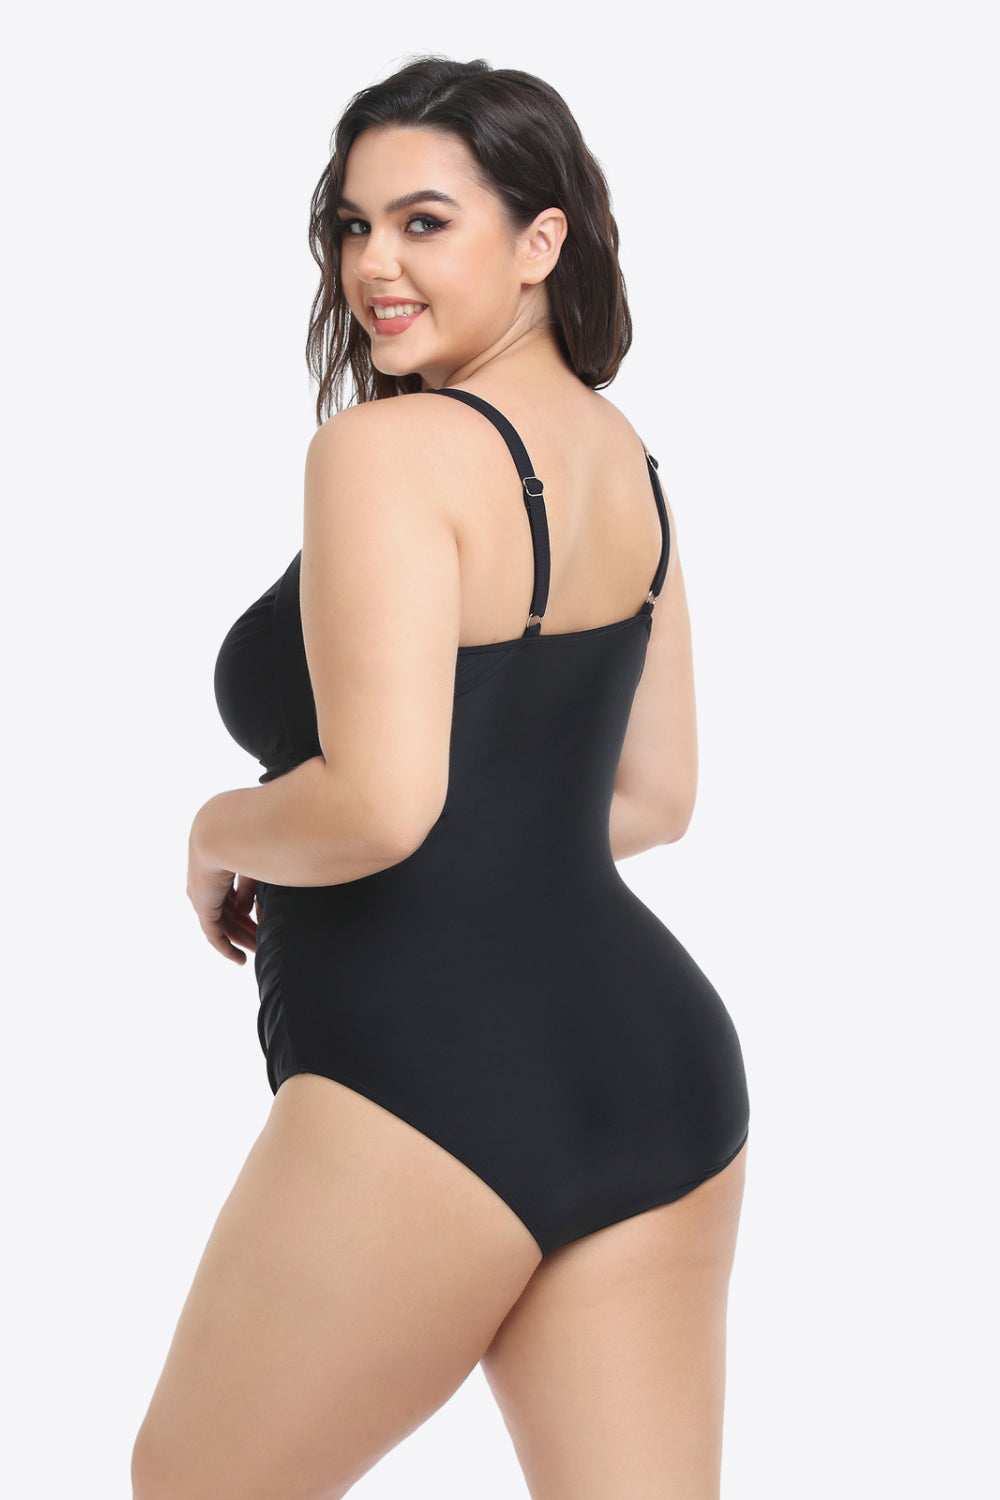 Plus Size Sleeveless Plunge One-Piece Swimsuit - Swimwear One-Pieces - FITGGINS